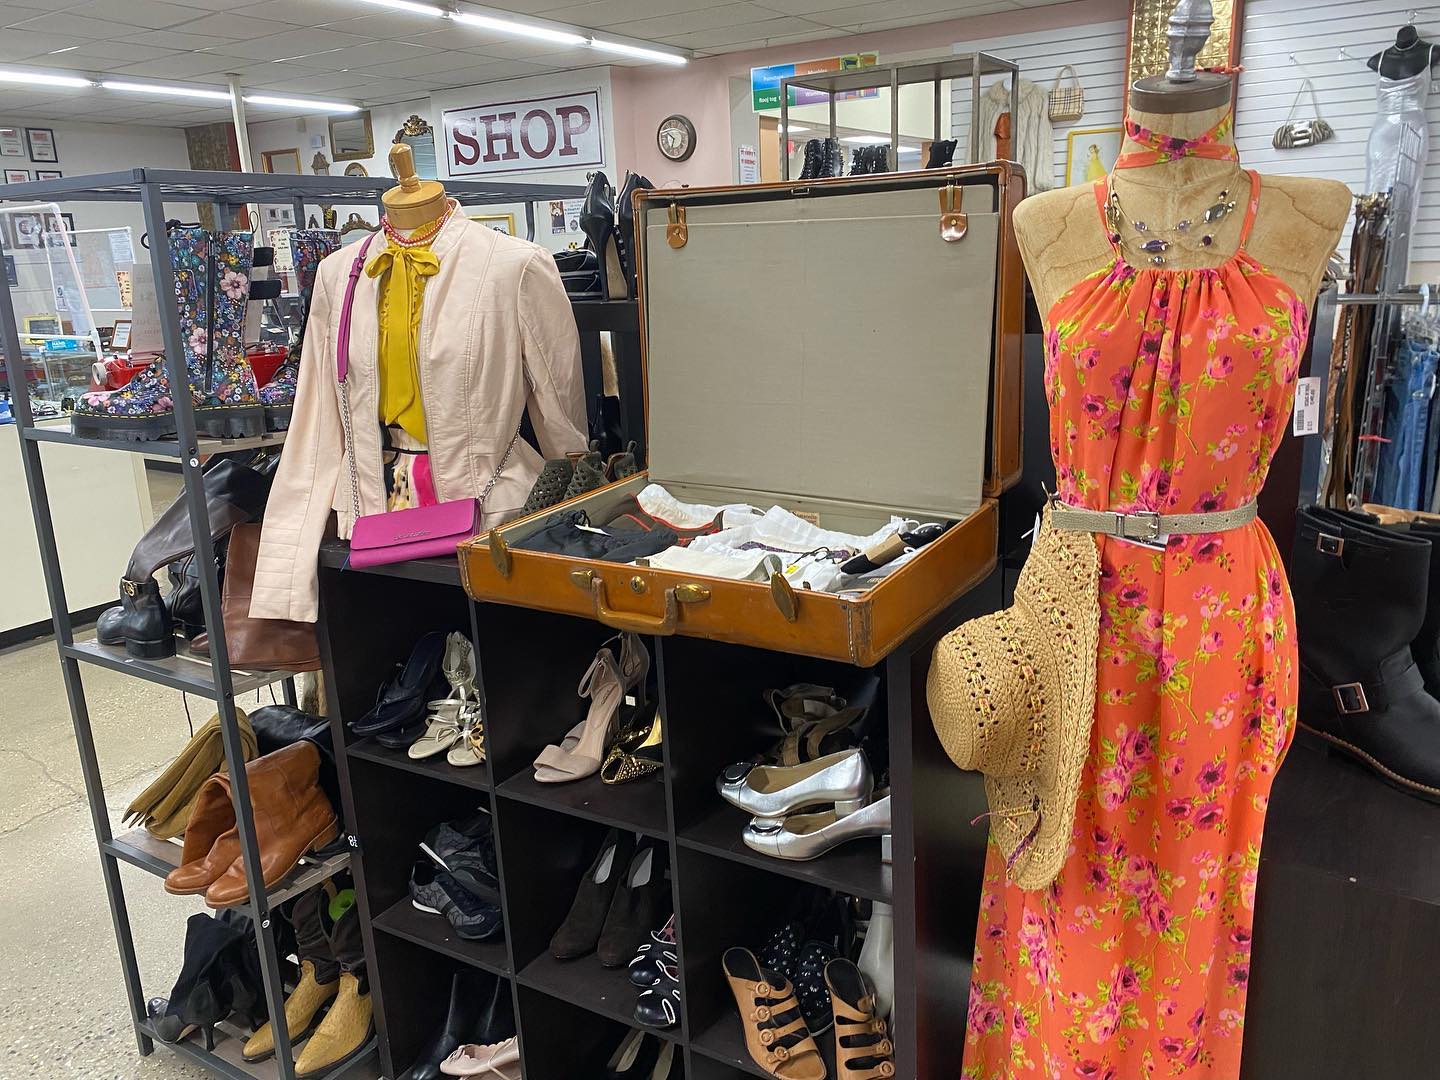 A display of the fashion and accessory Trunk Show at St. Vinny's Willy Street thrift store. There is a mannequin with a floral orange dress near an open trunk filled with colorful scarves. Next to the case there is a half-form mannequin wearing a light pink leather coat with a hot pink purse. Behind the half-form mannequin there is a tall rack of shoes.